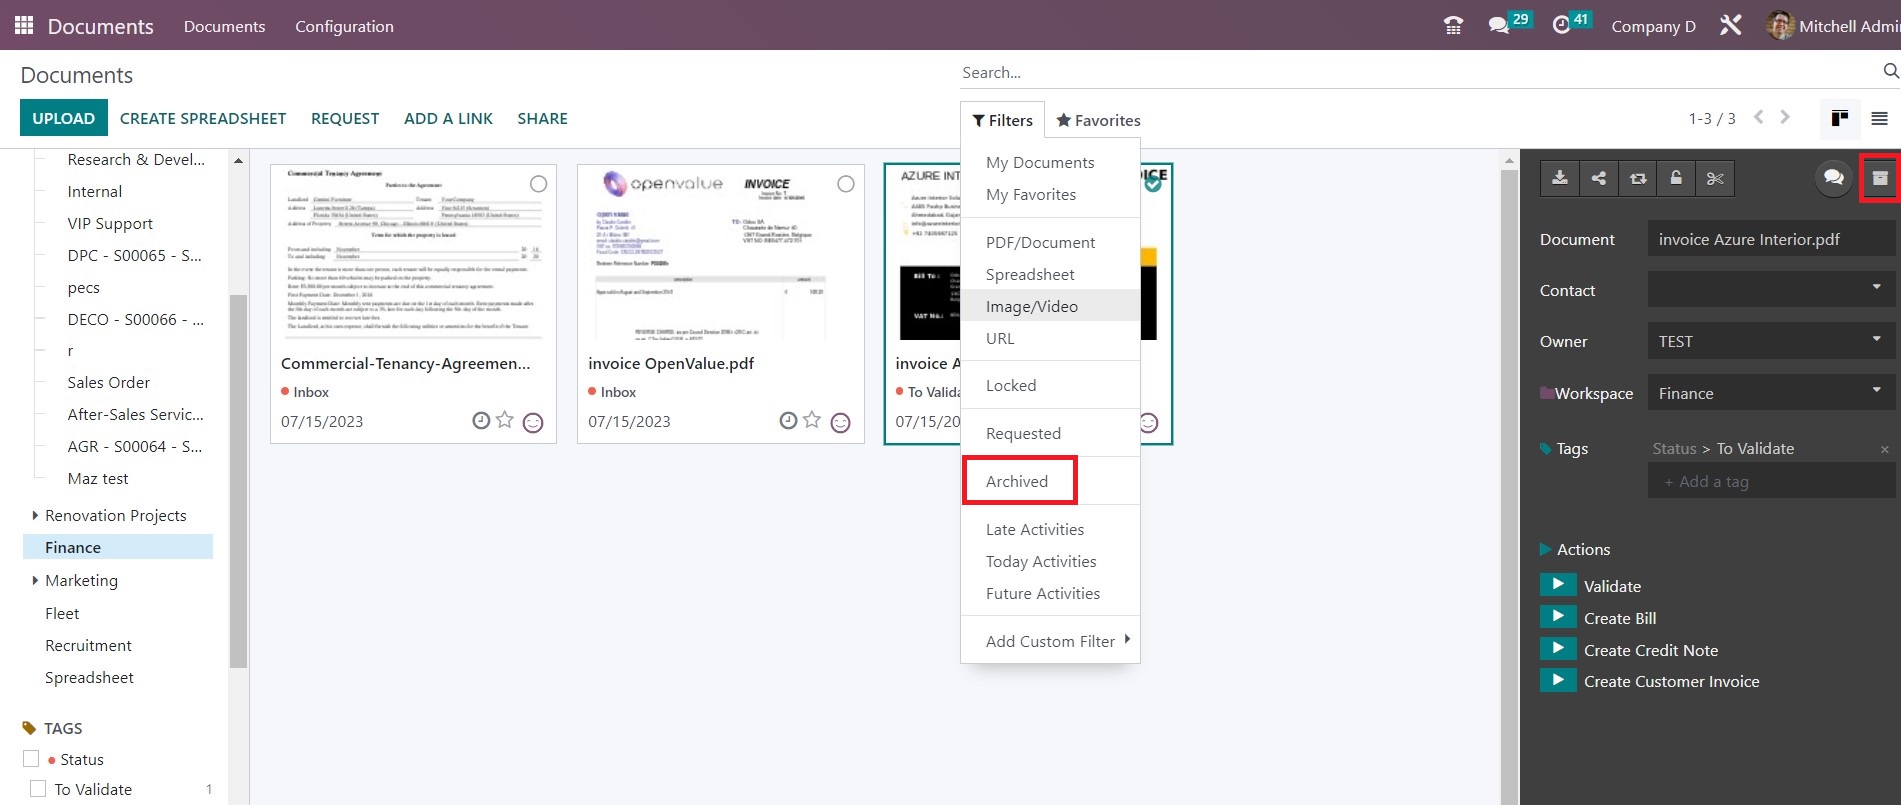 Best Practices for Implementing Odoo Documents - 10